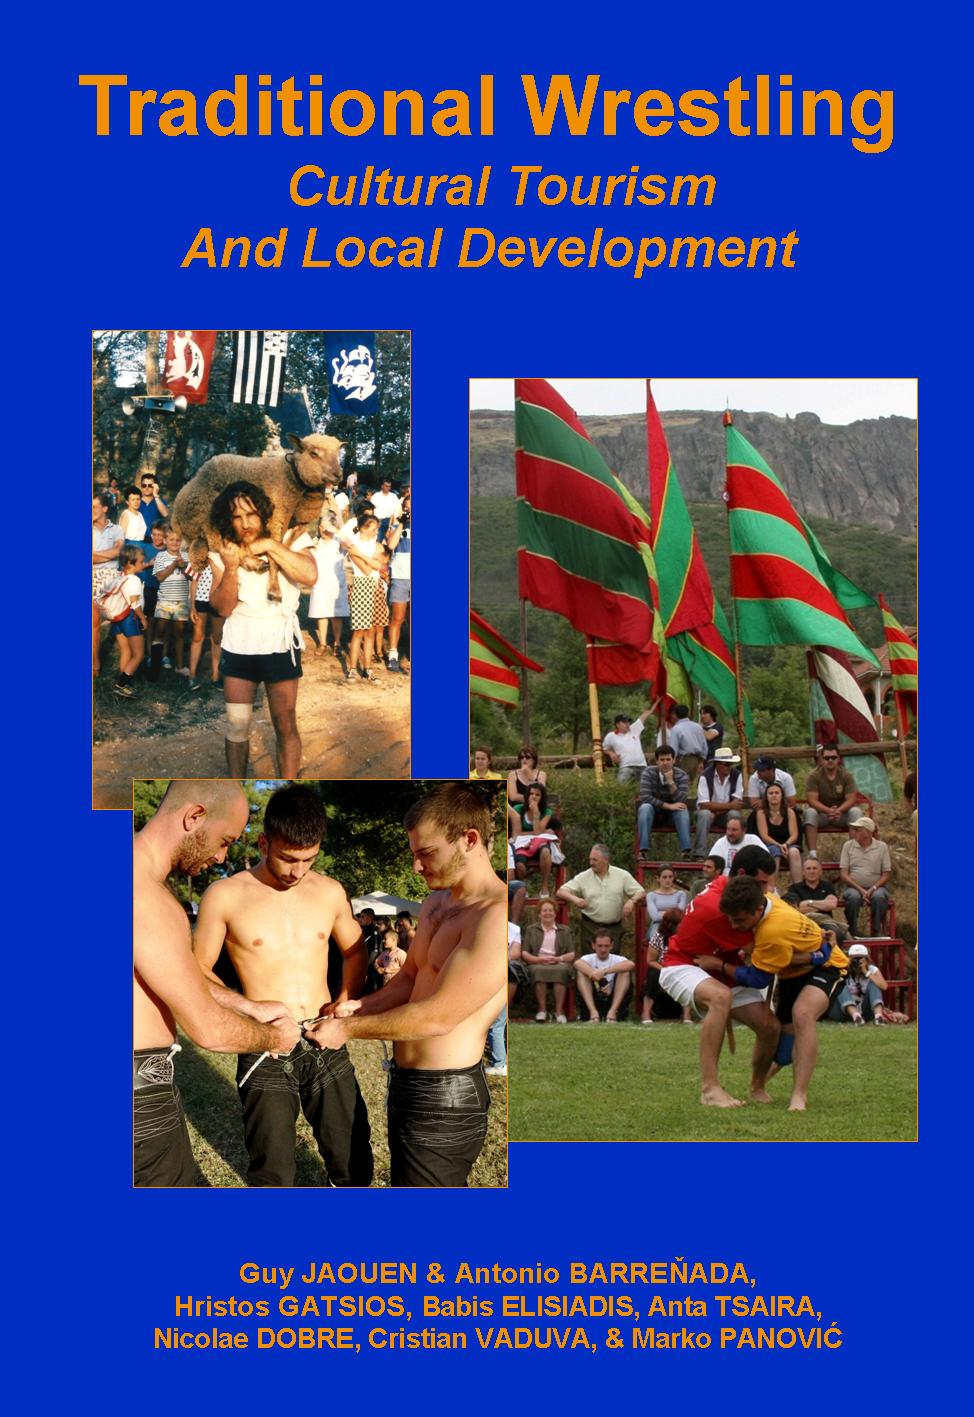 Traditional Wrestling - Promoting Traditional Wrestling For Cultural Tourism and Local Development